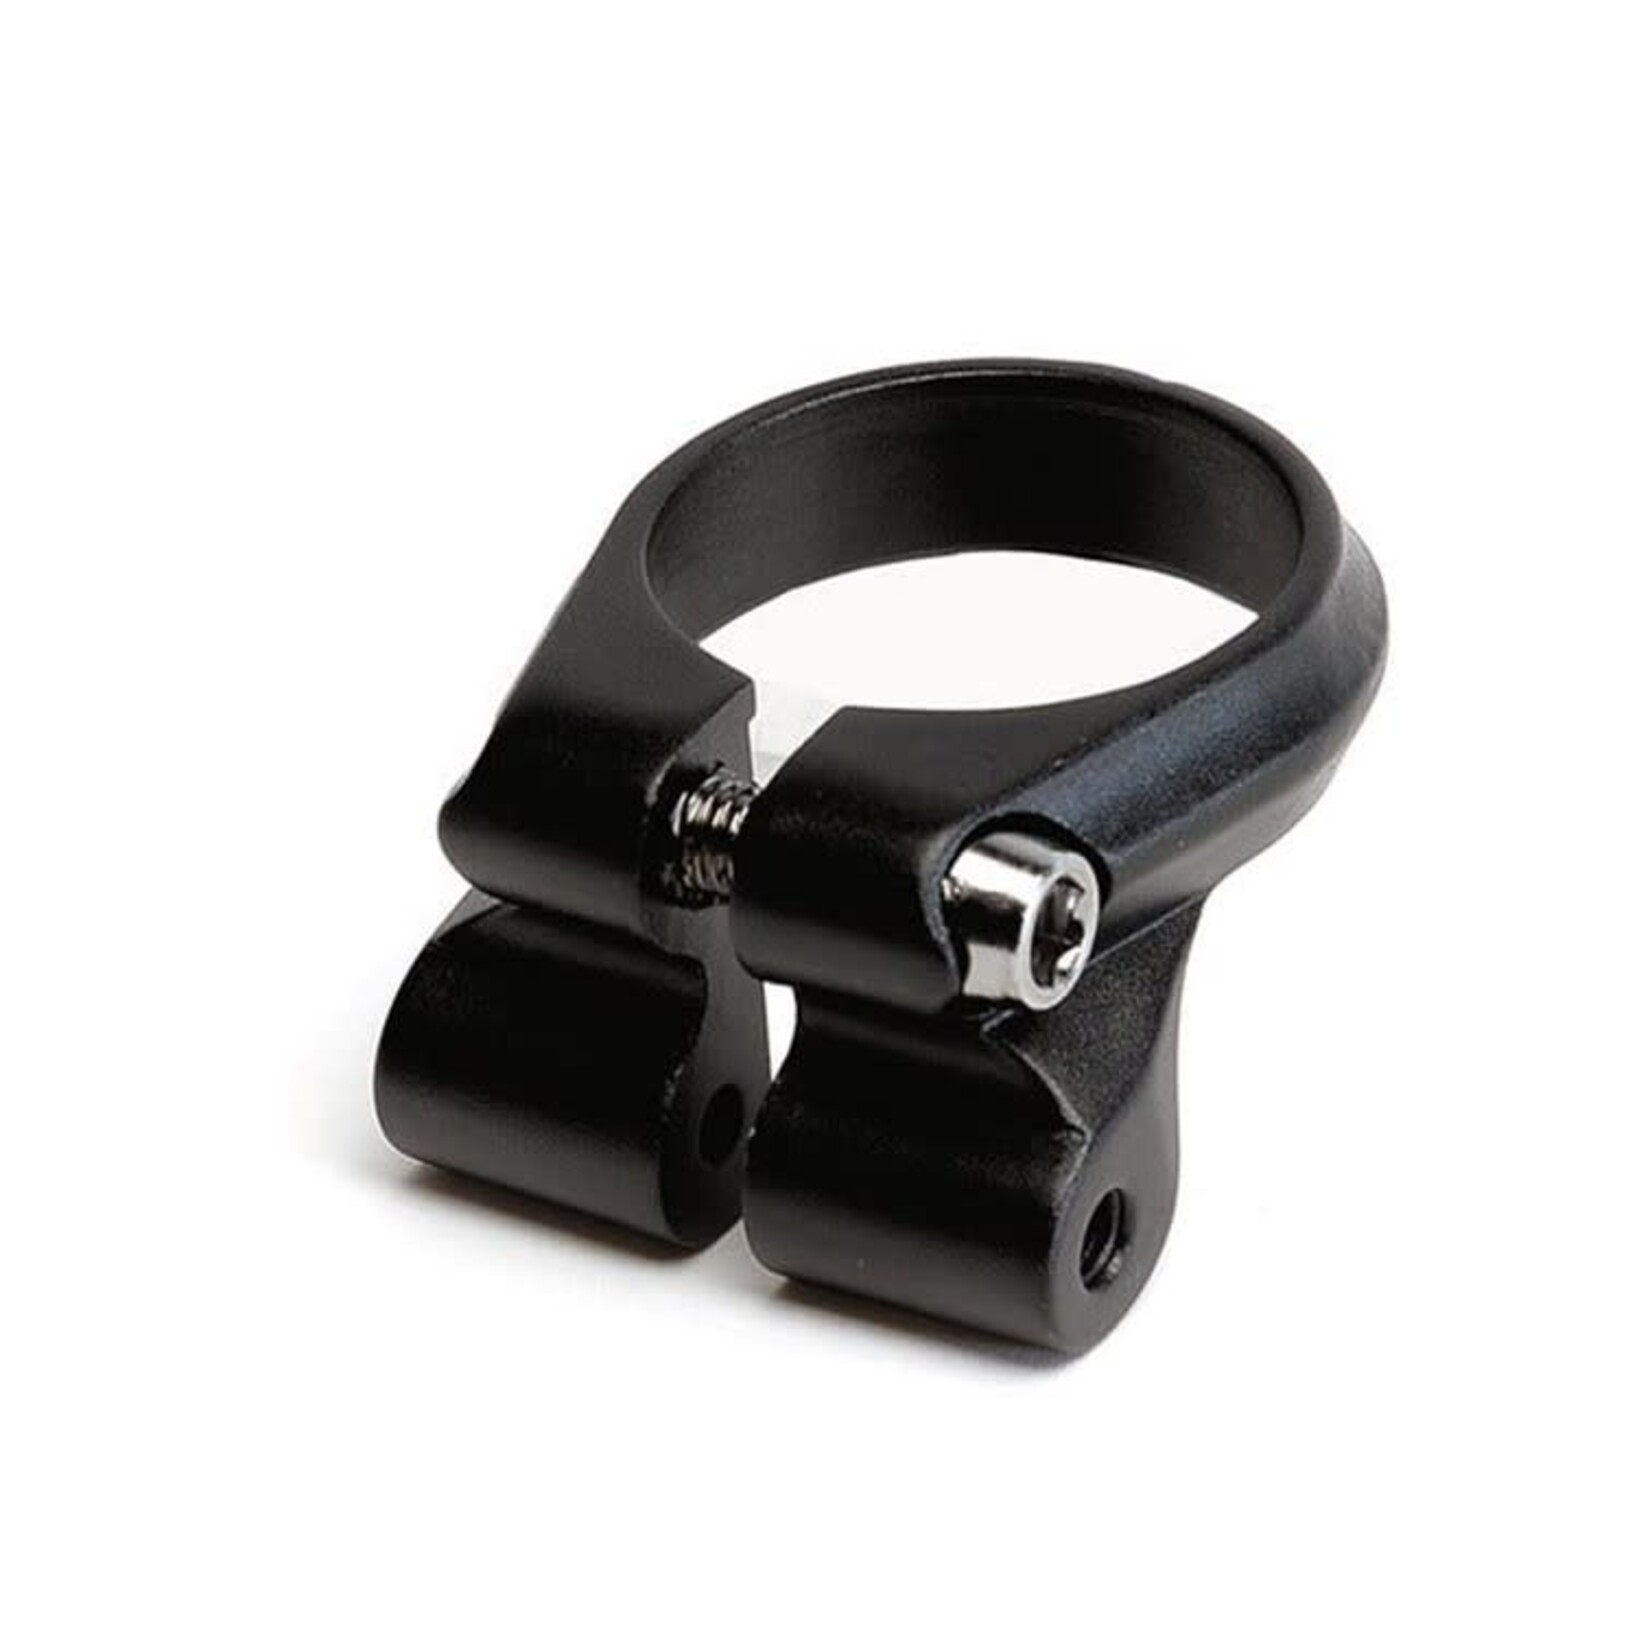 Tioga 28.6mm Seat Post Clamp with Rack Mount